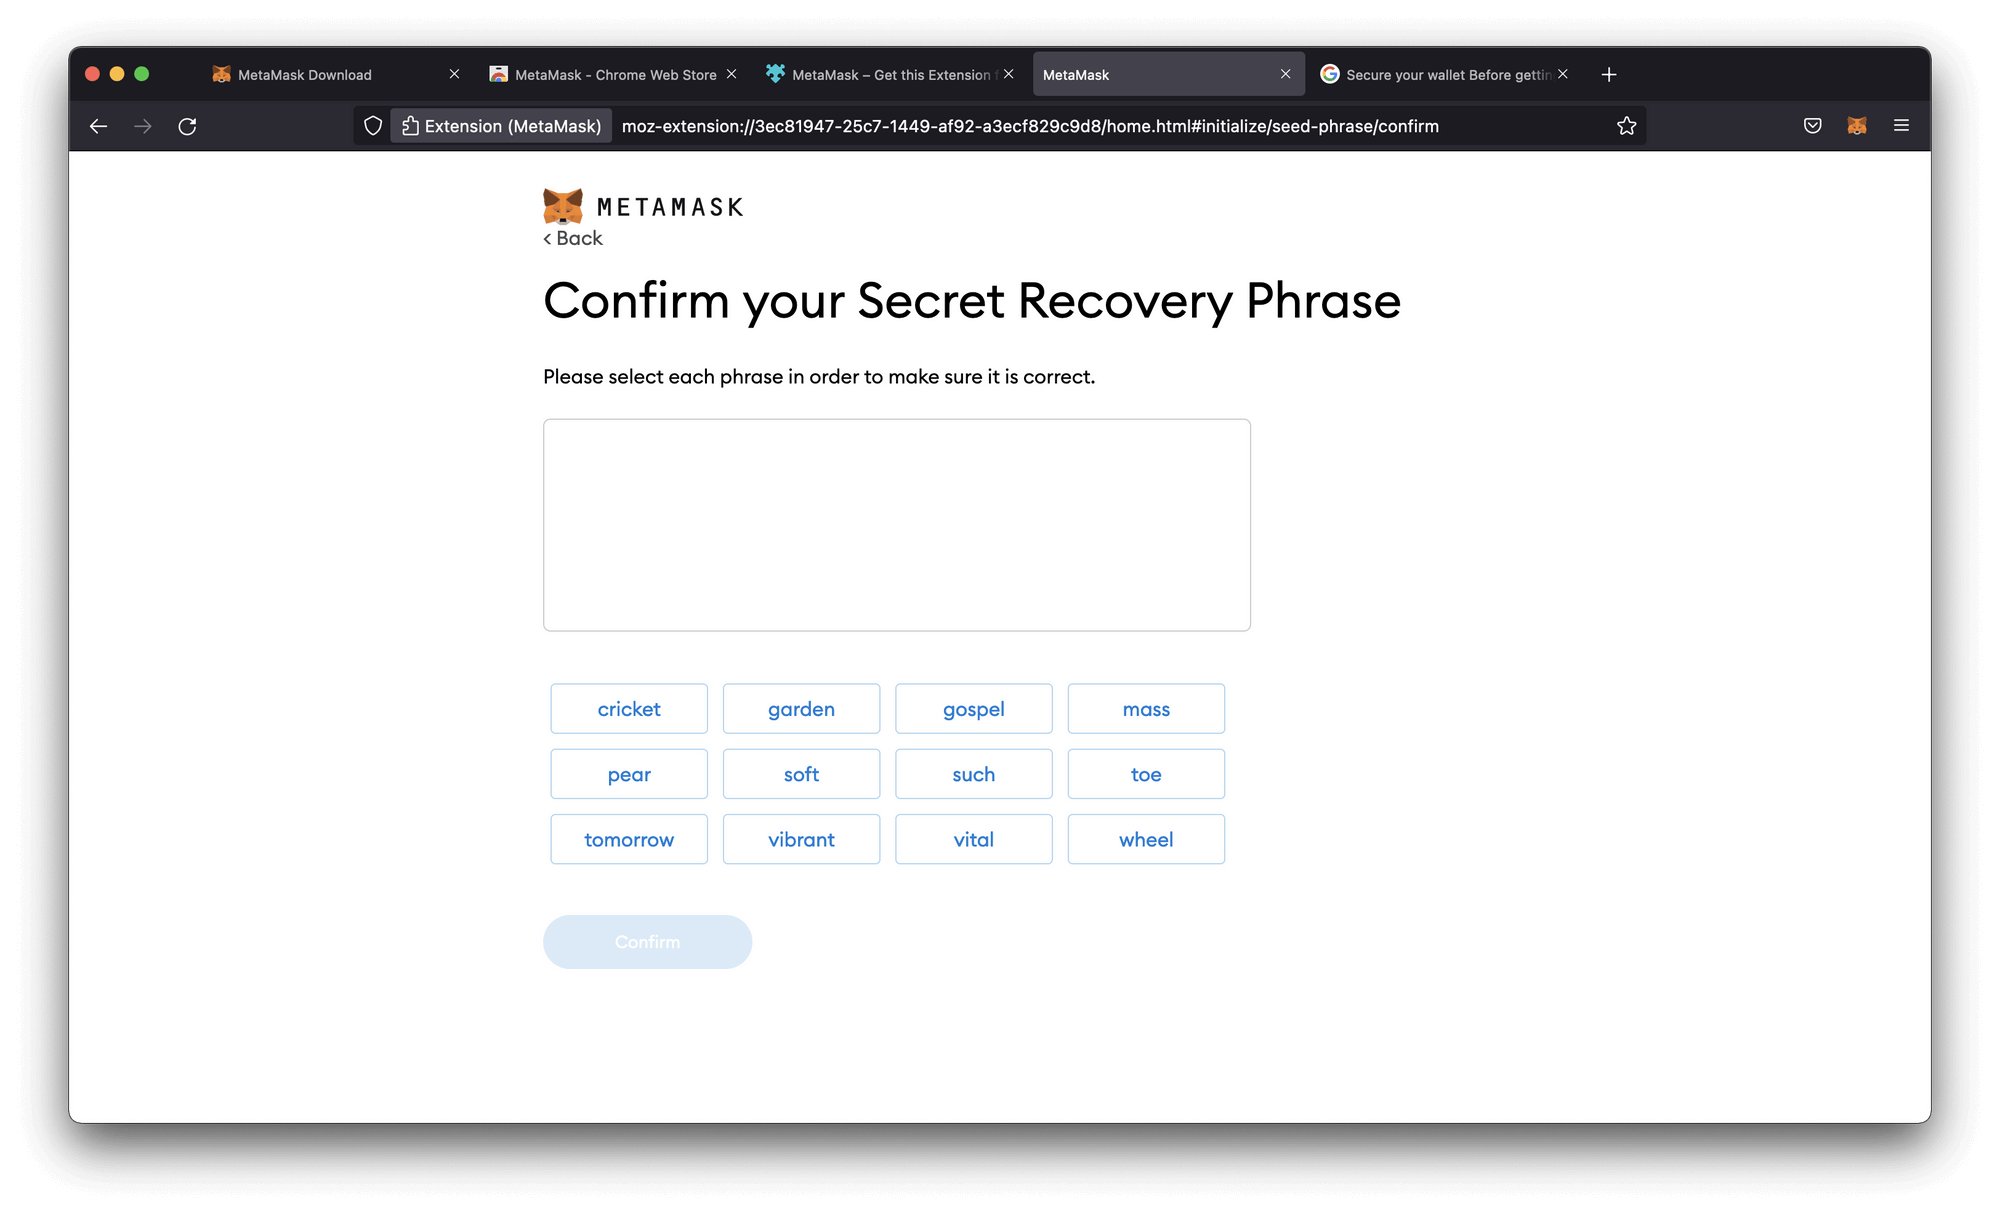 Confirm your Secret Recovery Phrase